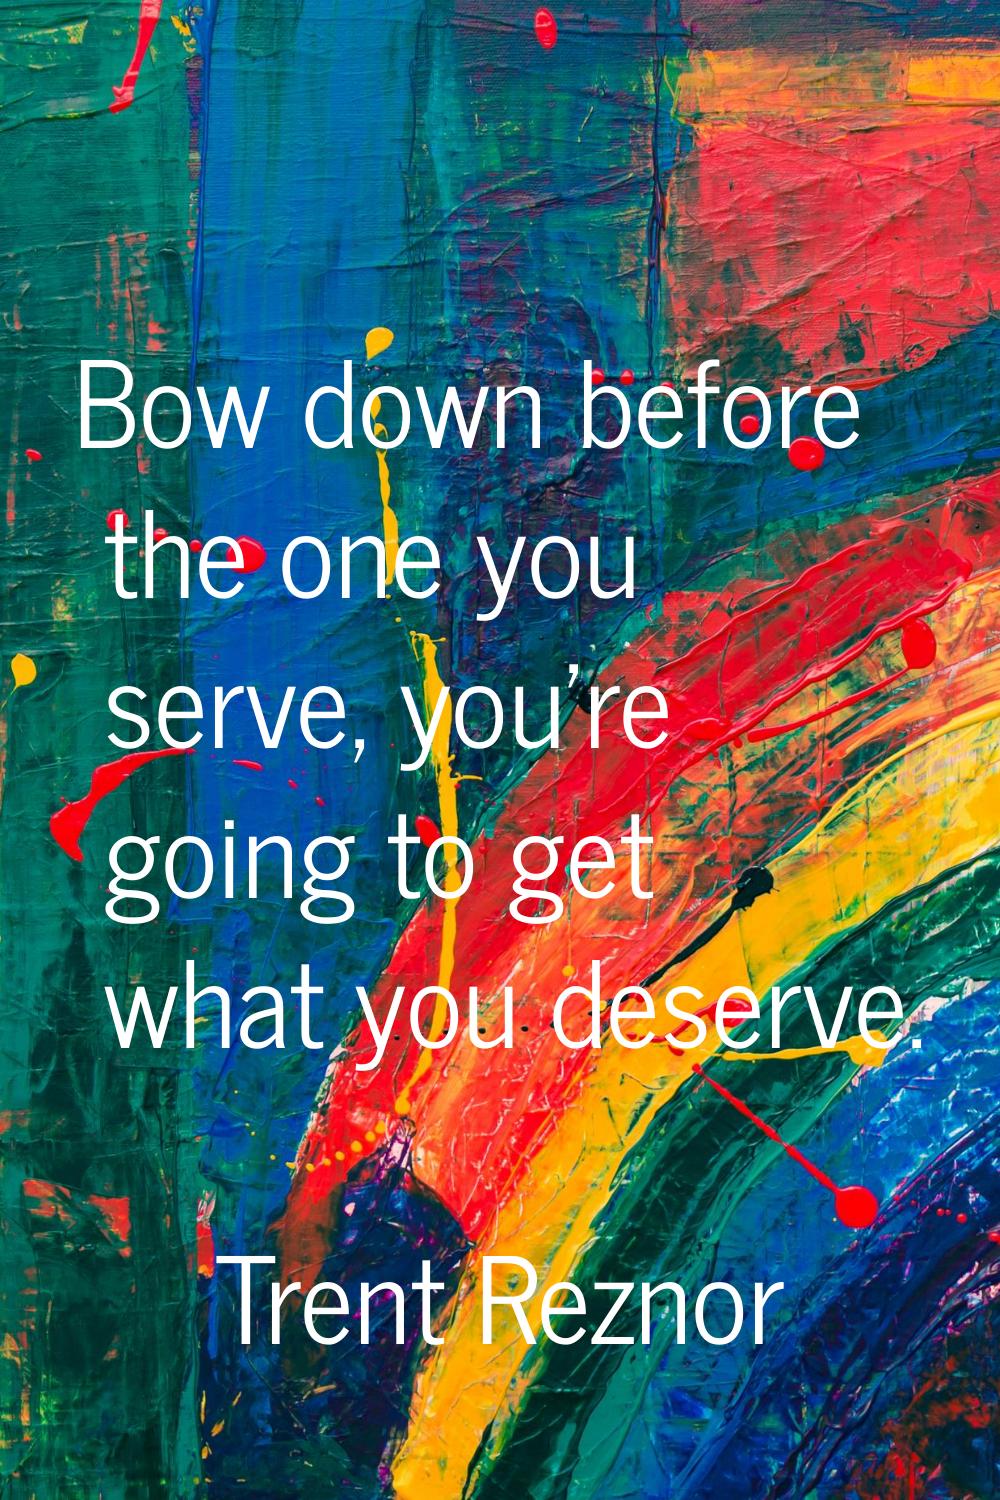 Bow down before the one you serve, you're going to get what you deserve.